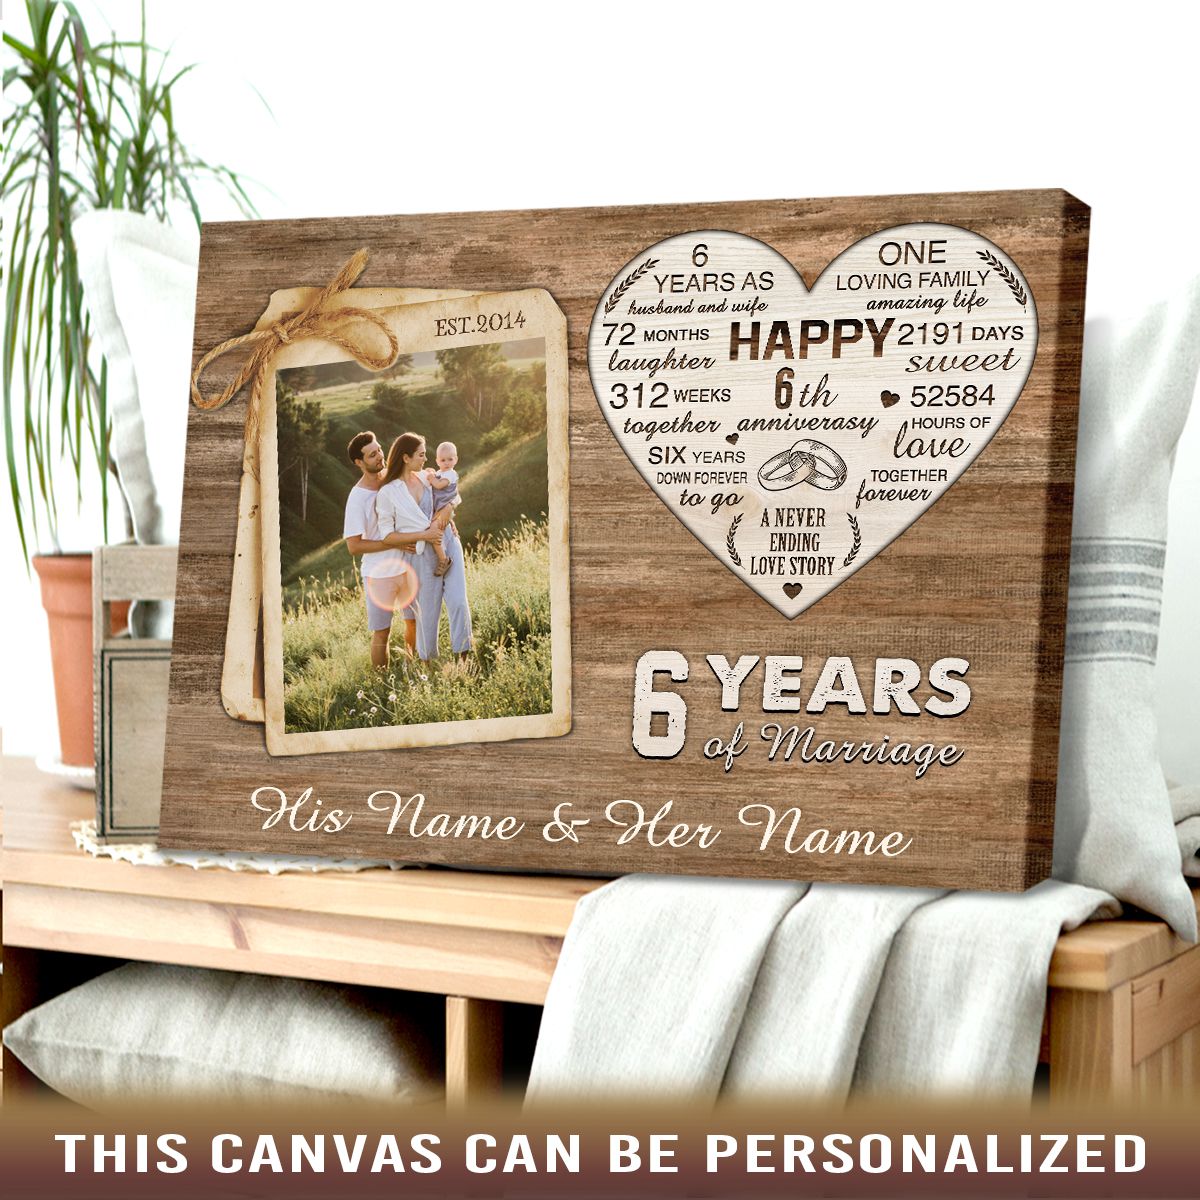  6th Wedding Anniversary Gifts for Him or Her 6 years